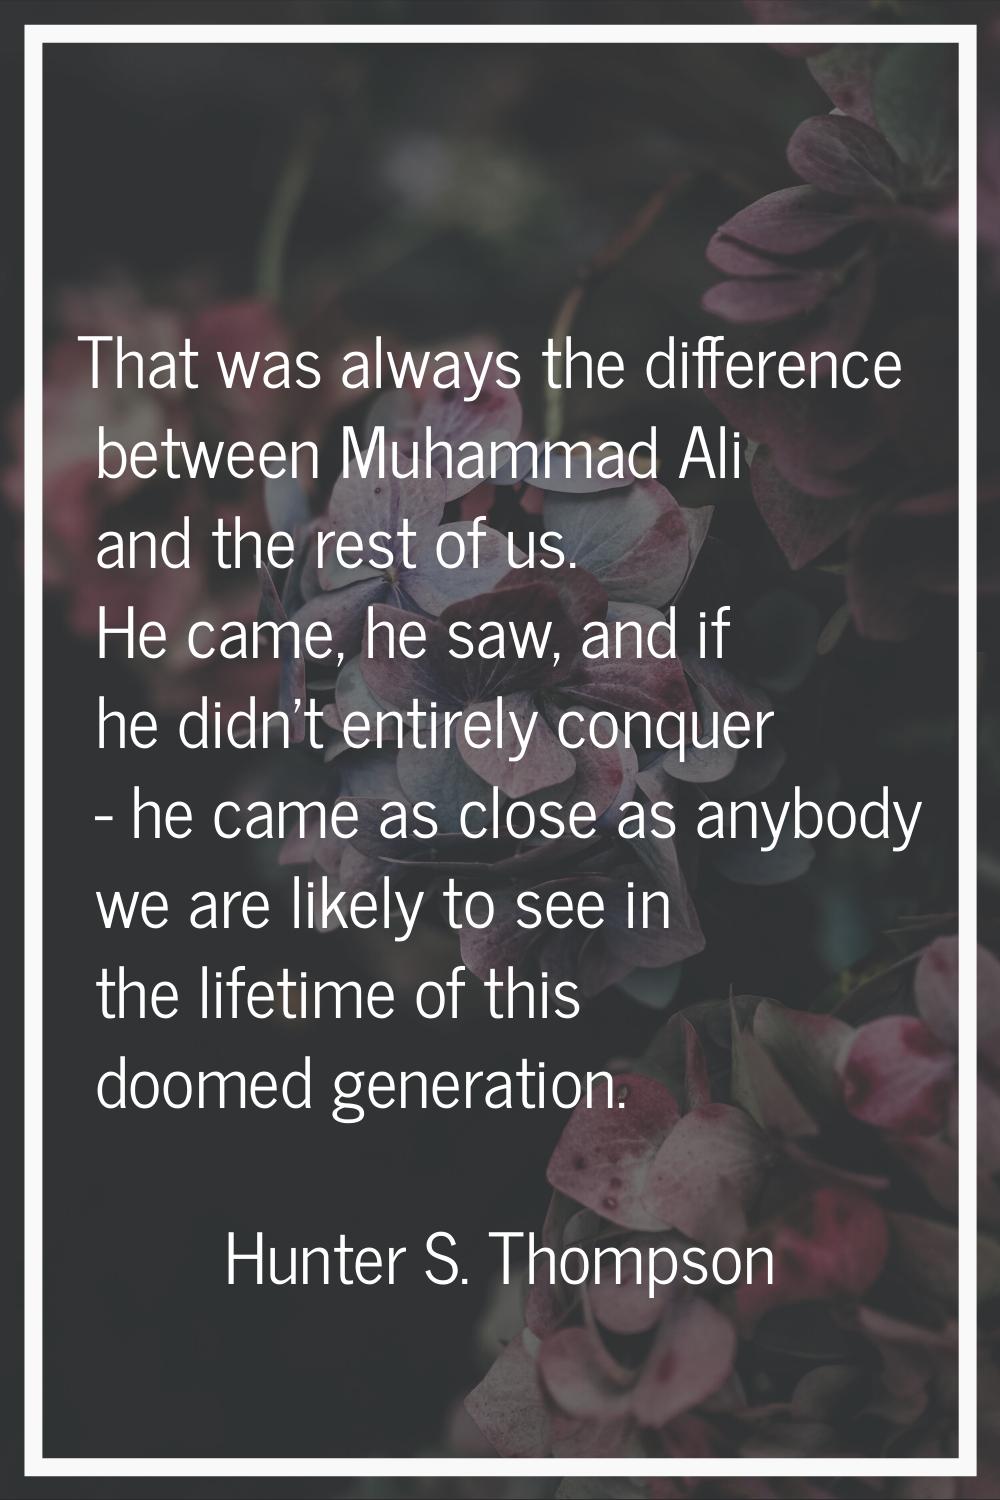 That was always the difference between Muhammad Ali and the rest of us. He came, he saw, and if he 